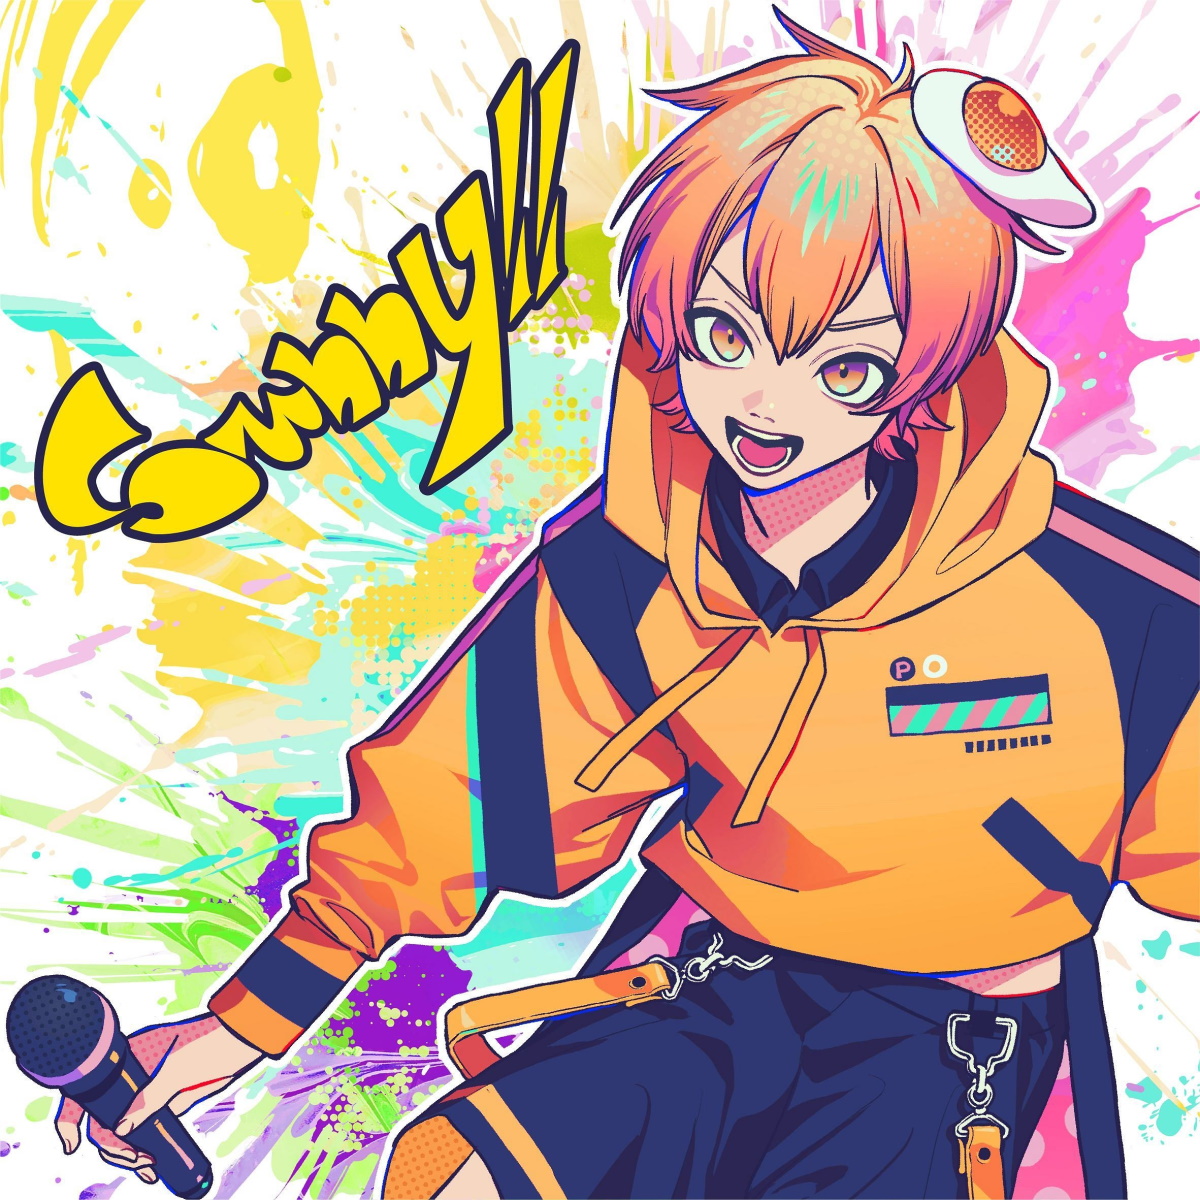 Cover for『PMaru-sama - Sherbet』from the release『Sunny!!』